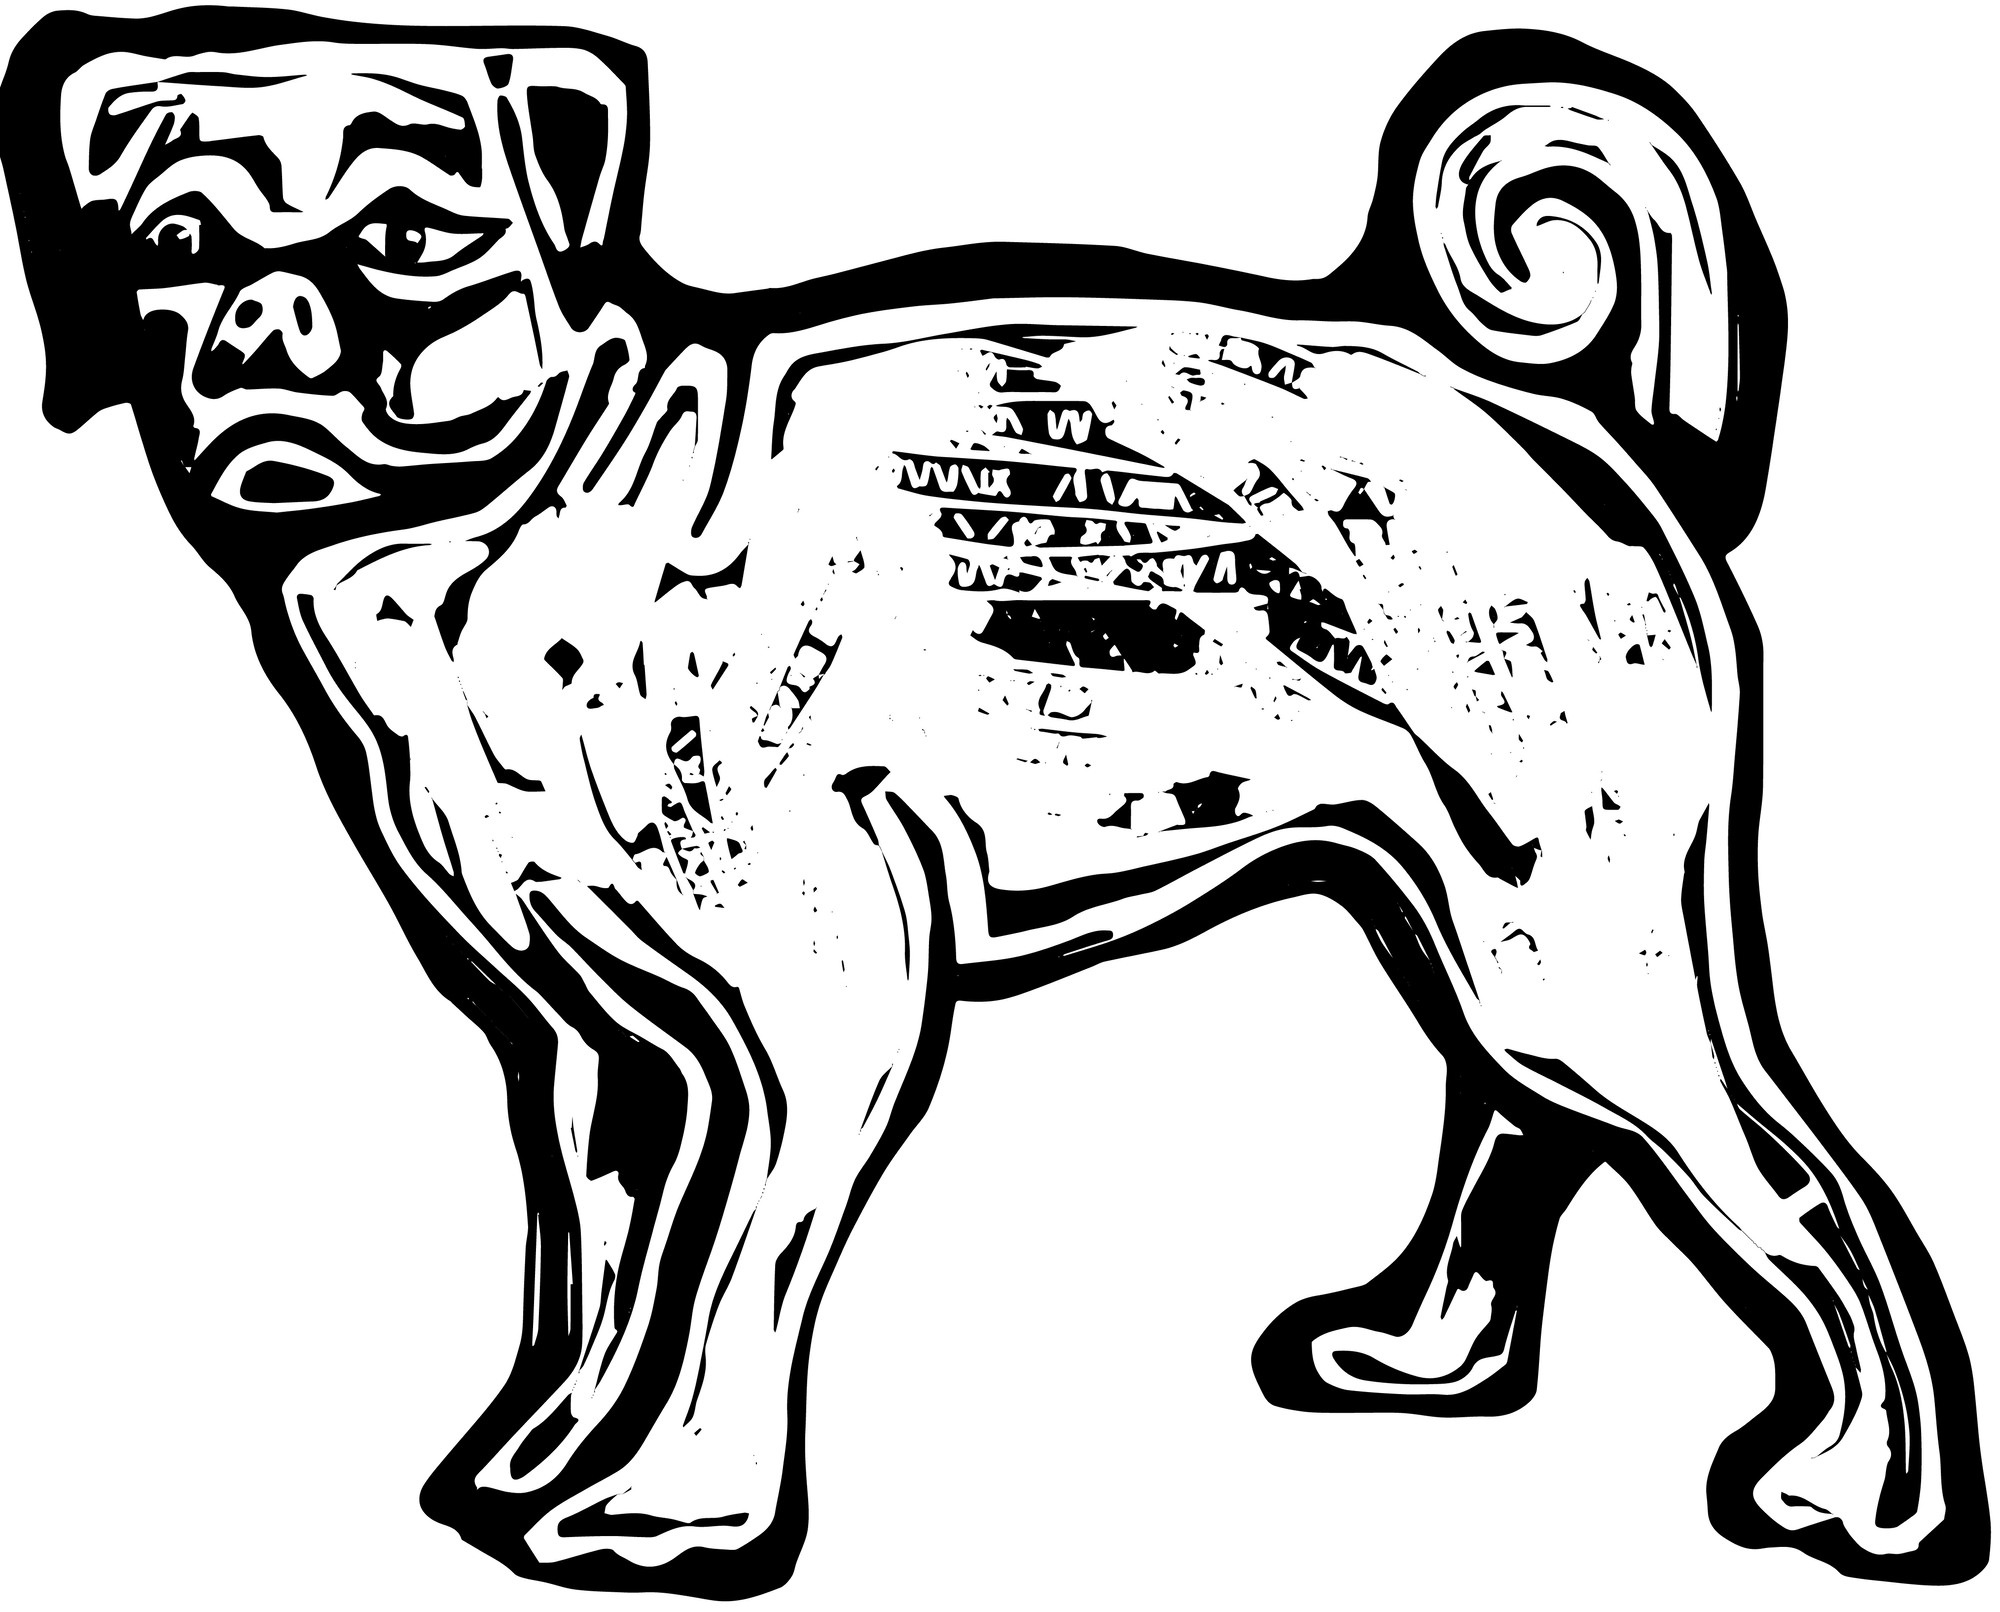 sketch-of-a-dog-free-image-download